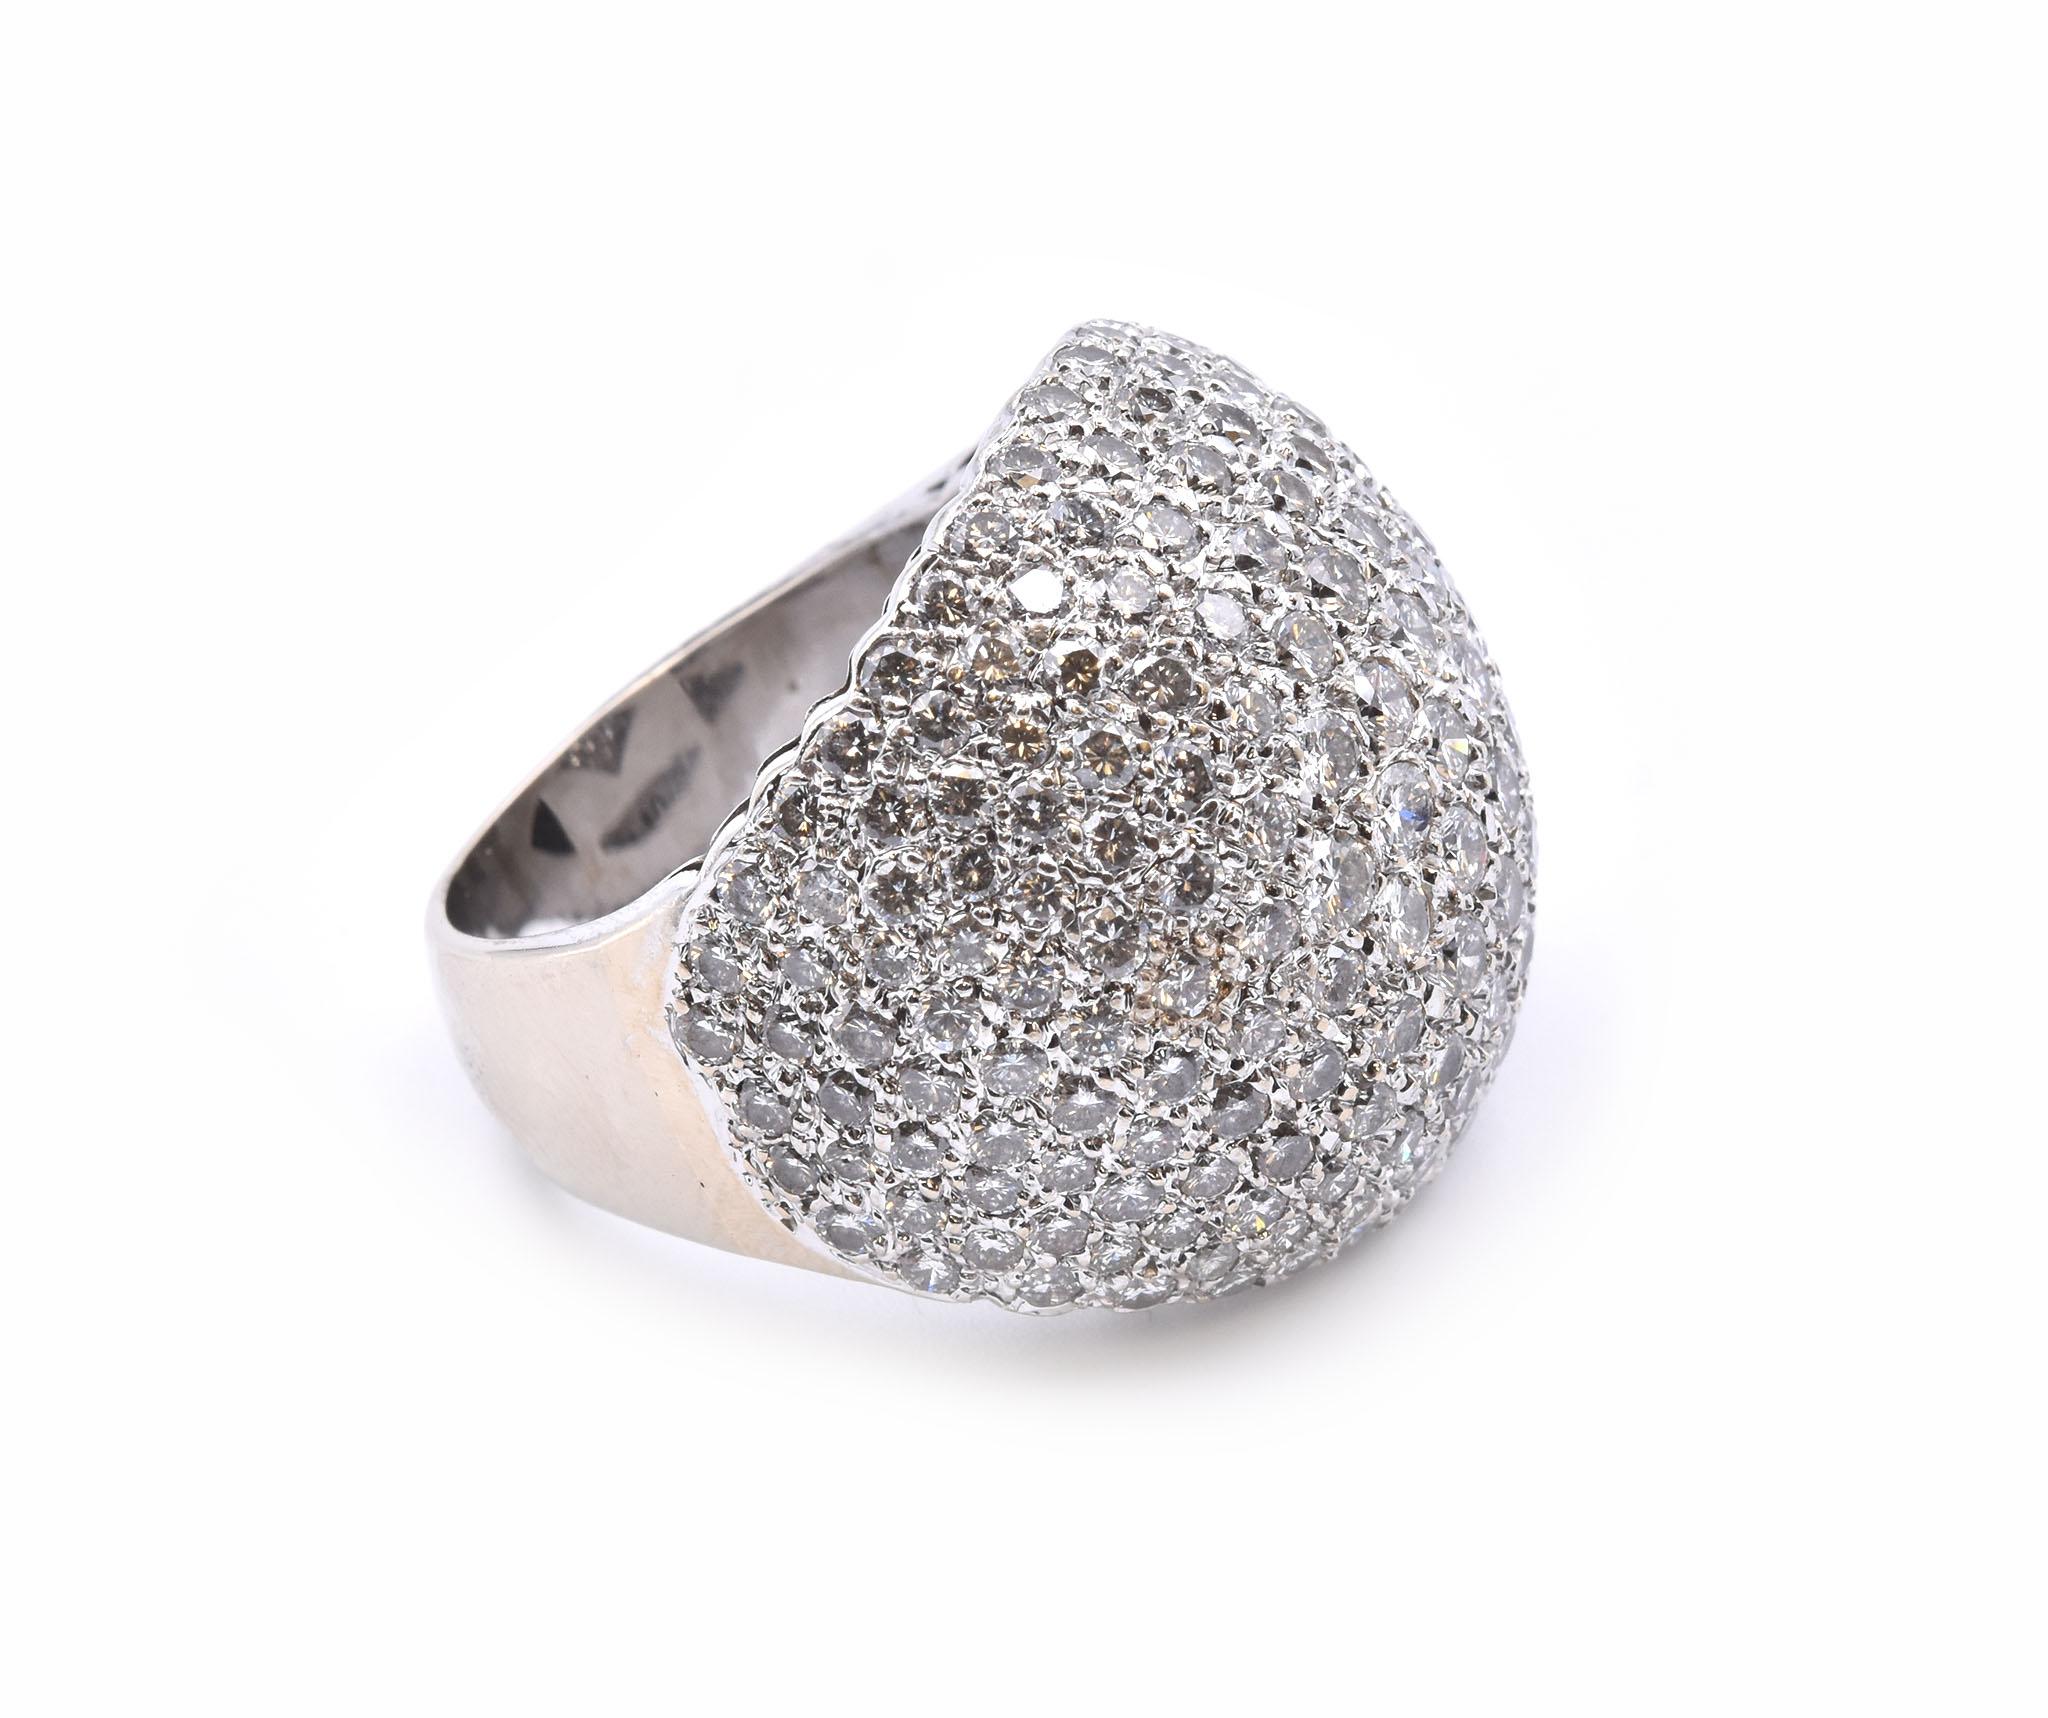 Designer: custom
Material: 18k white gold
Diamonds: 205 round brilliant cut = 7.50cttw
Color: G
Clarity: VS
Ring Size: 7 (Please allow up to two additional business days for sizing requests)
Dimensions: ring top measures 24.6mm wide
Weight: 23.57